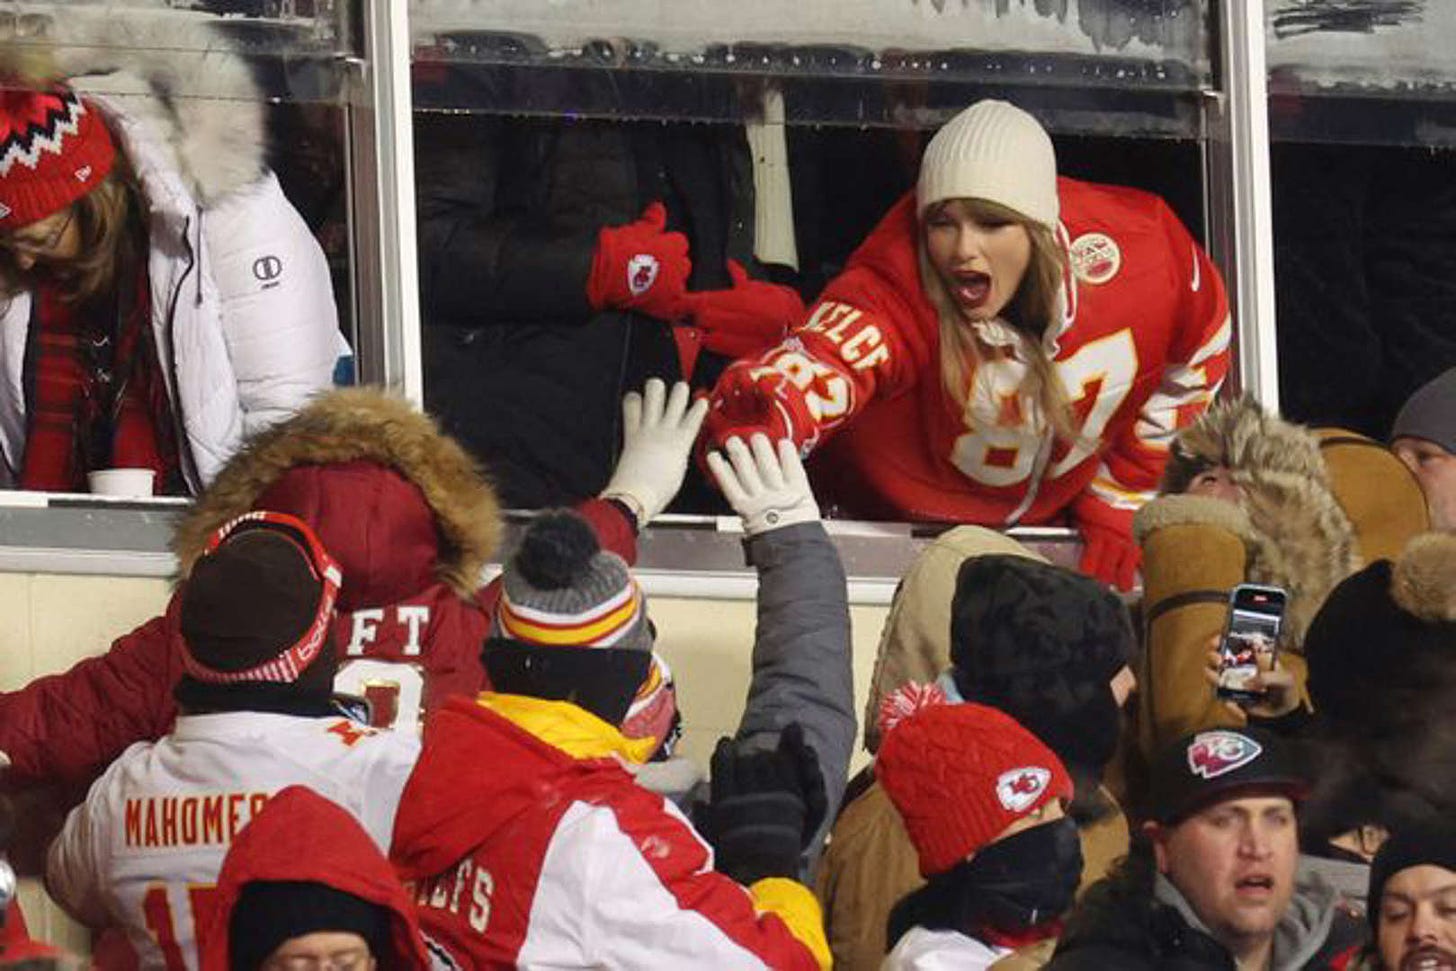 Taylor Swift attends the AFC Wild Card Playoffs between the Miami Dolphins and the Kansas City Chiefs